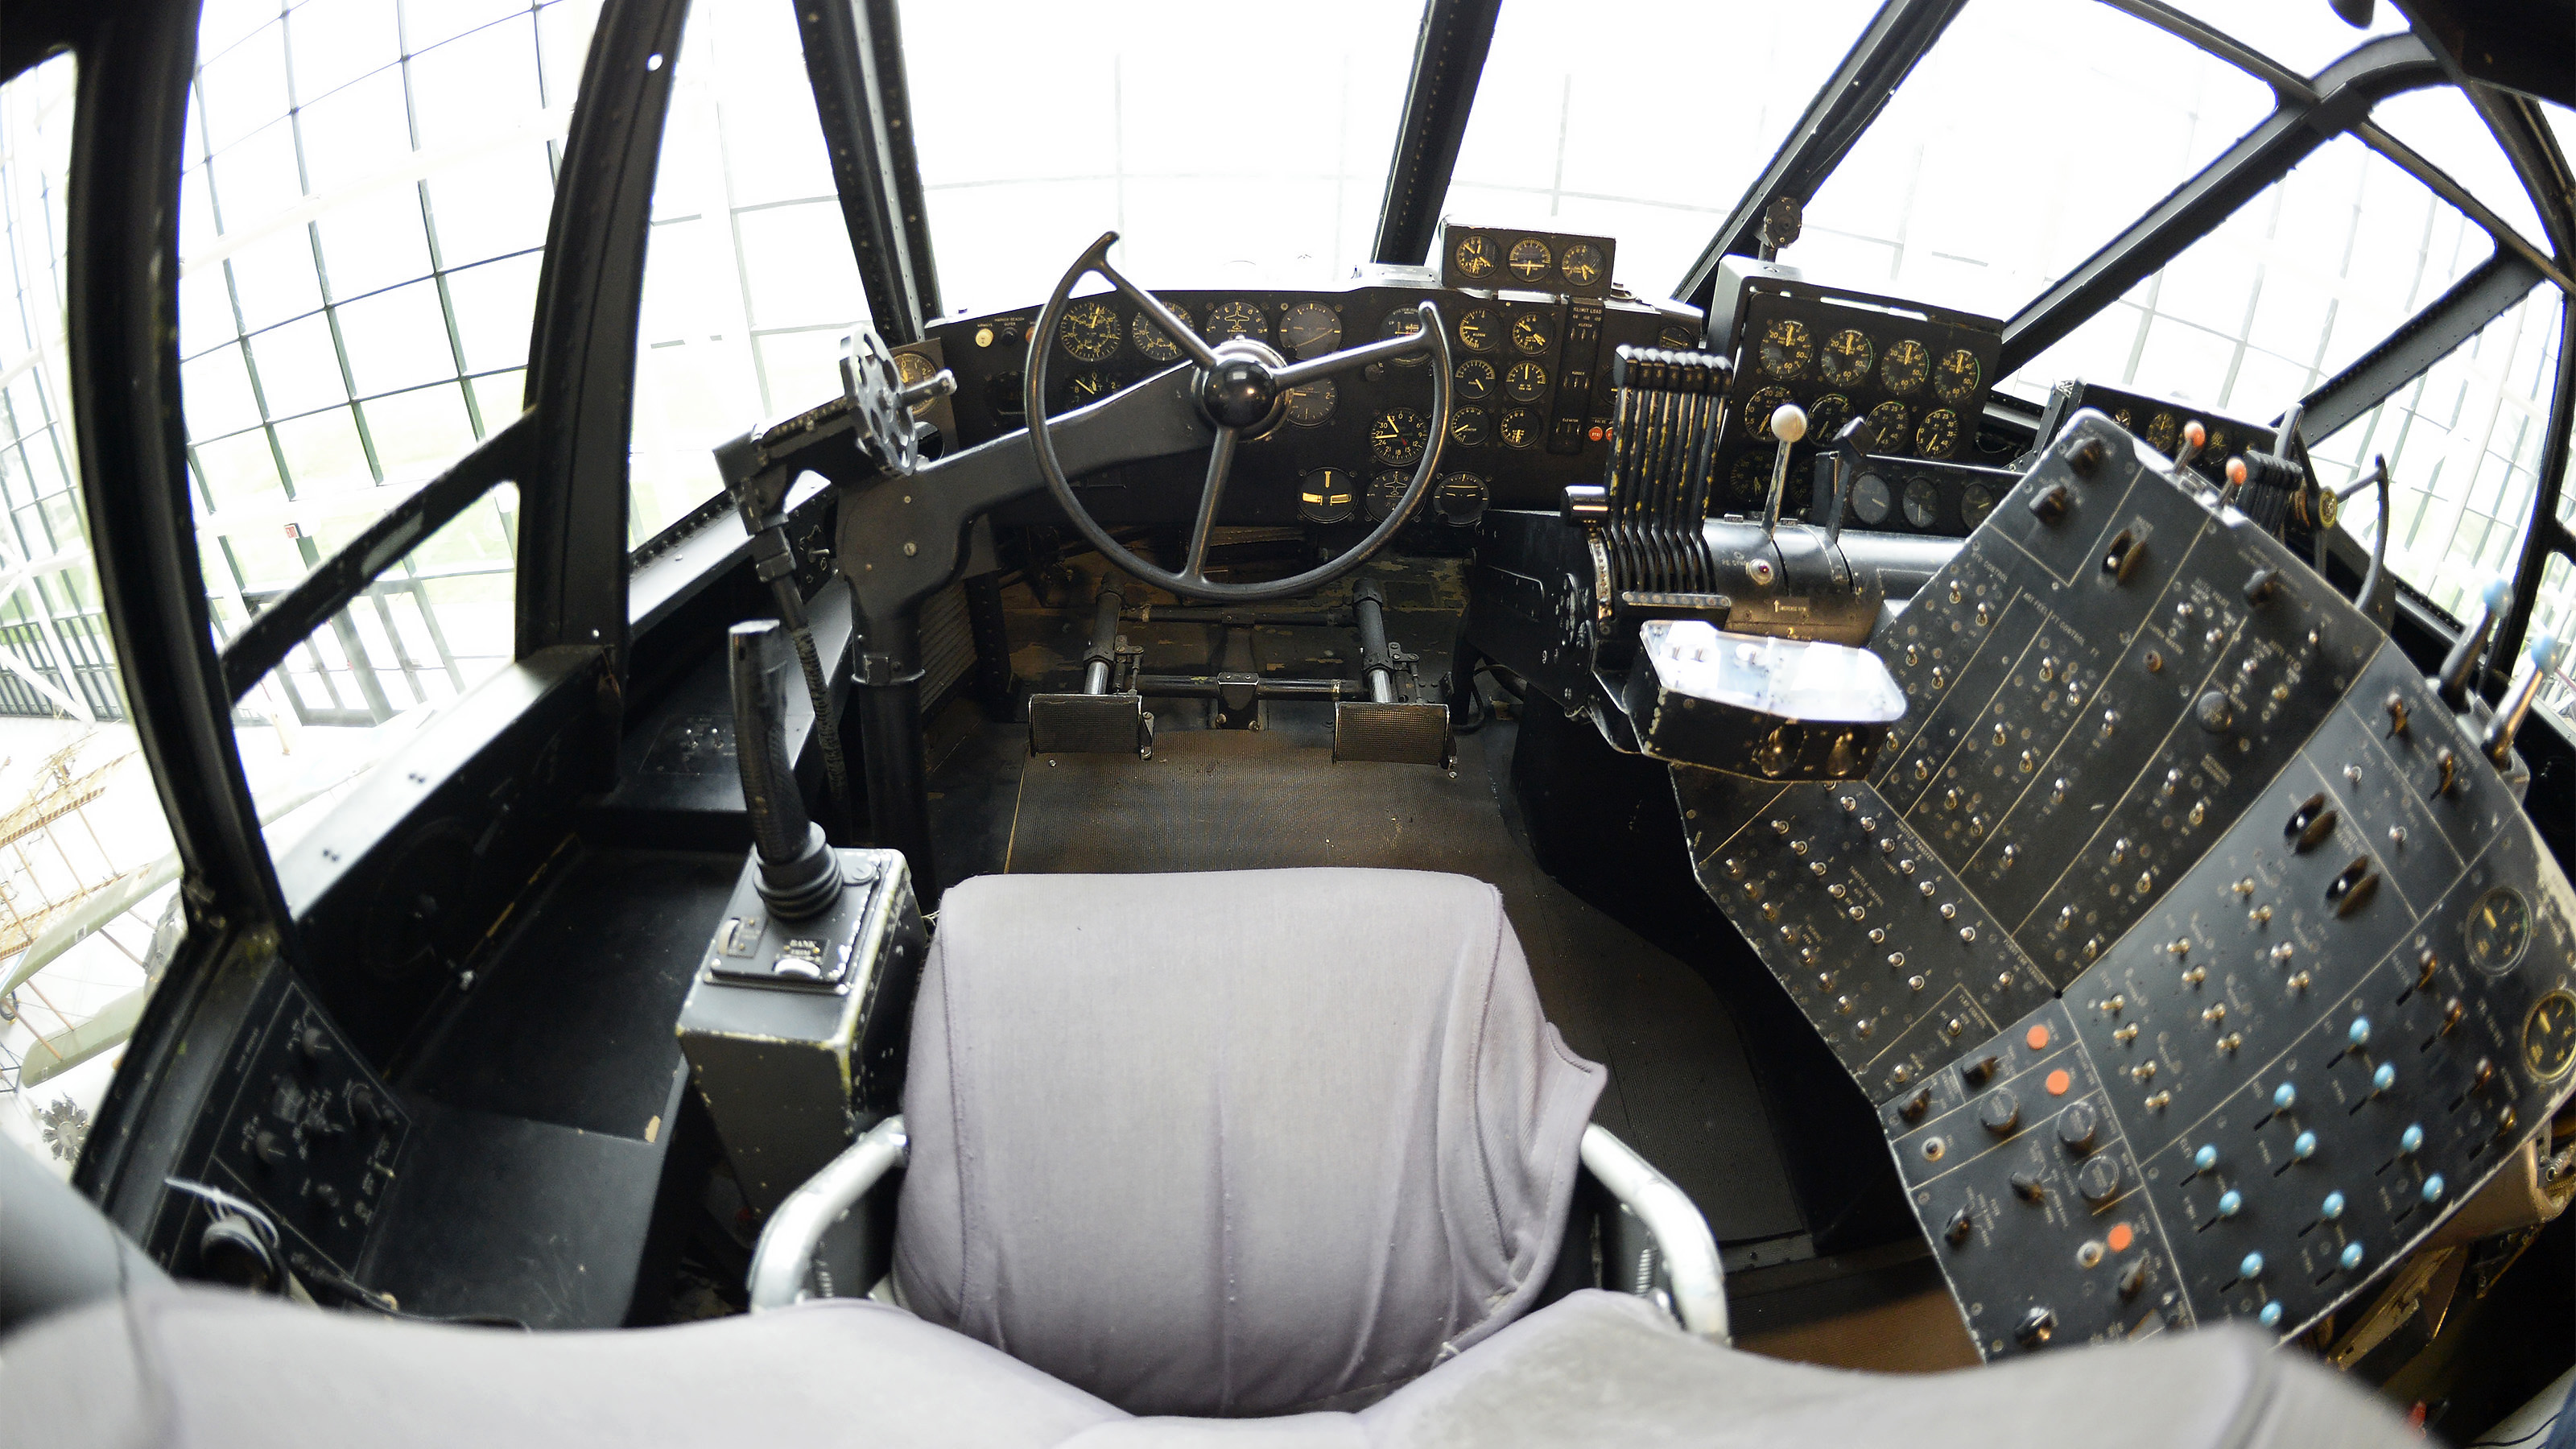 The view from Howard Hughes' H-4 Hercules cockpit is expansive, with four large windows, eight power levers, and hundreds of switches, dials, and gauges. Photo by David Tulis.